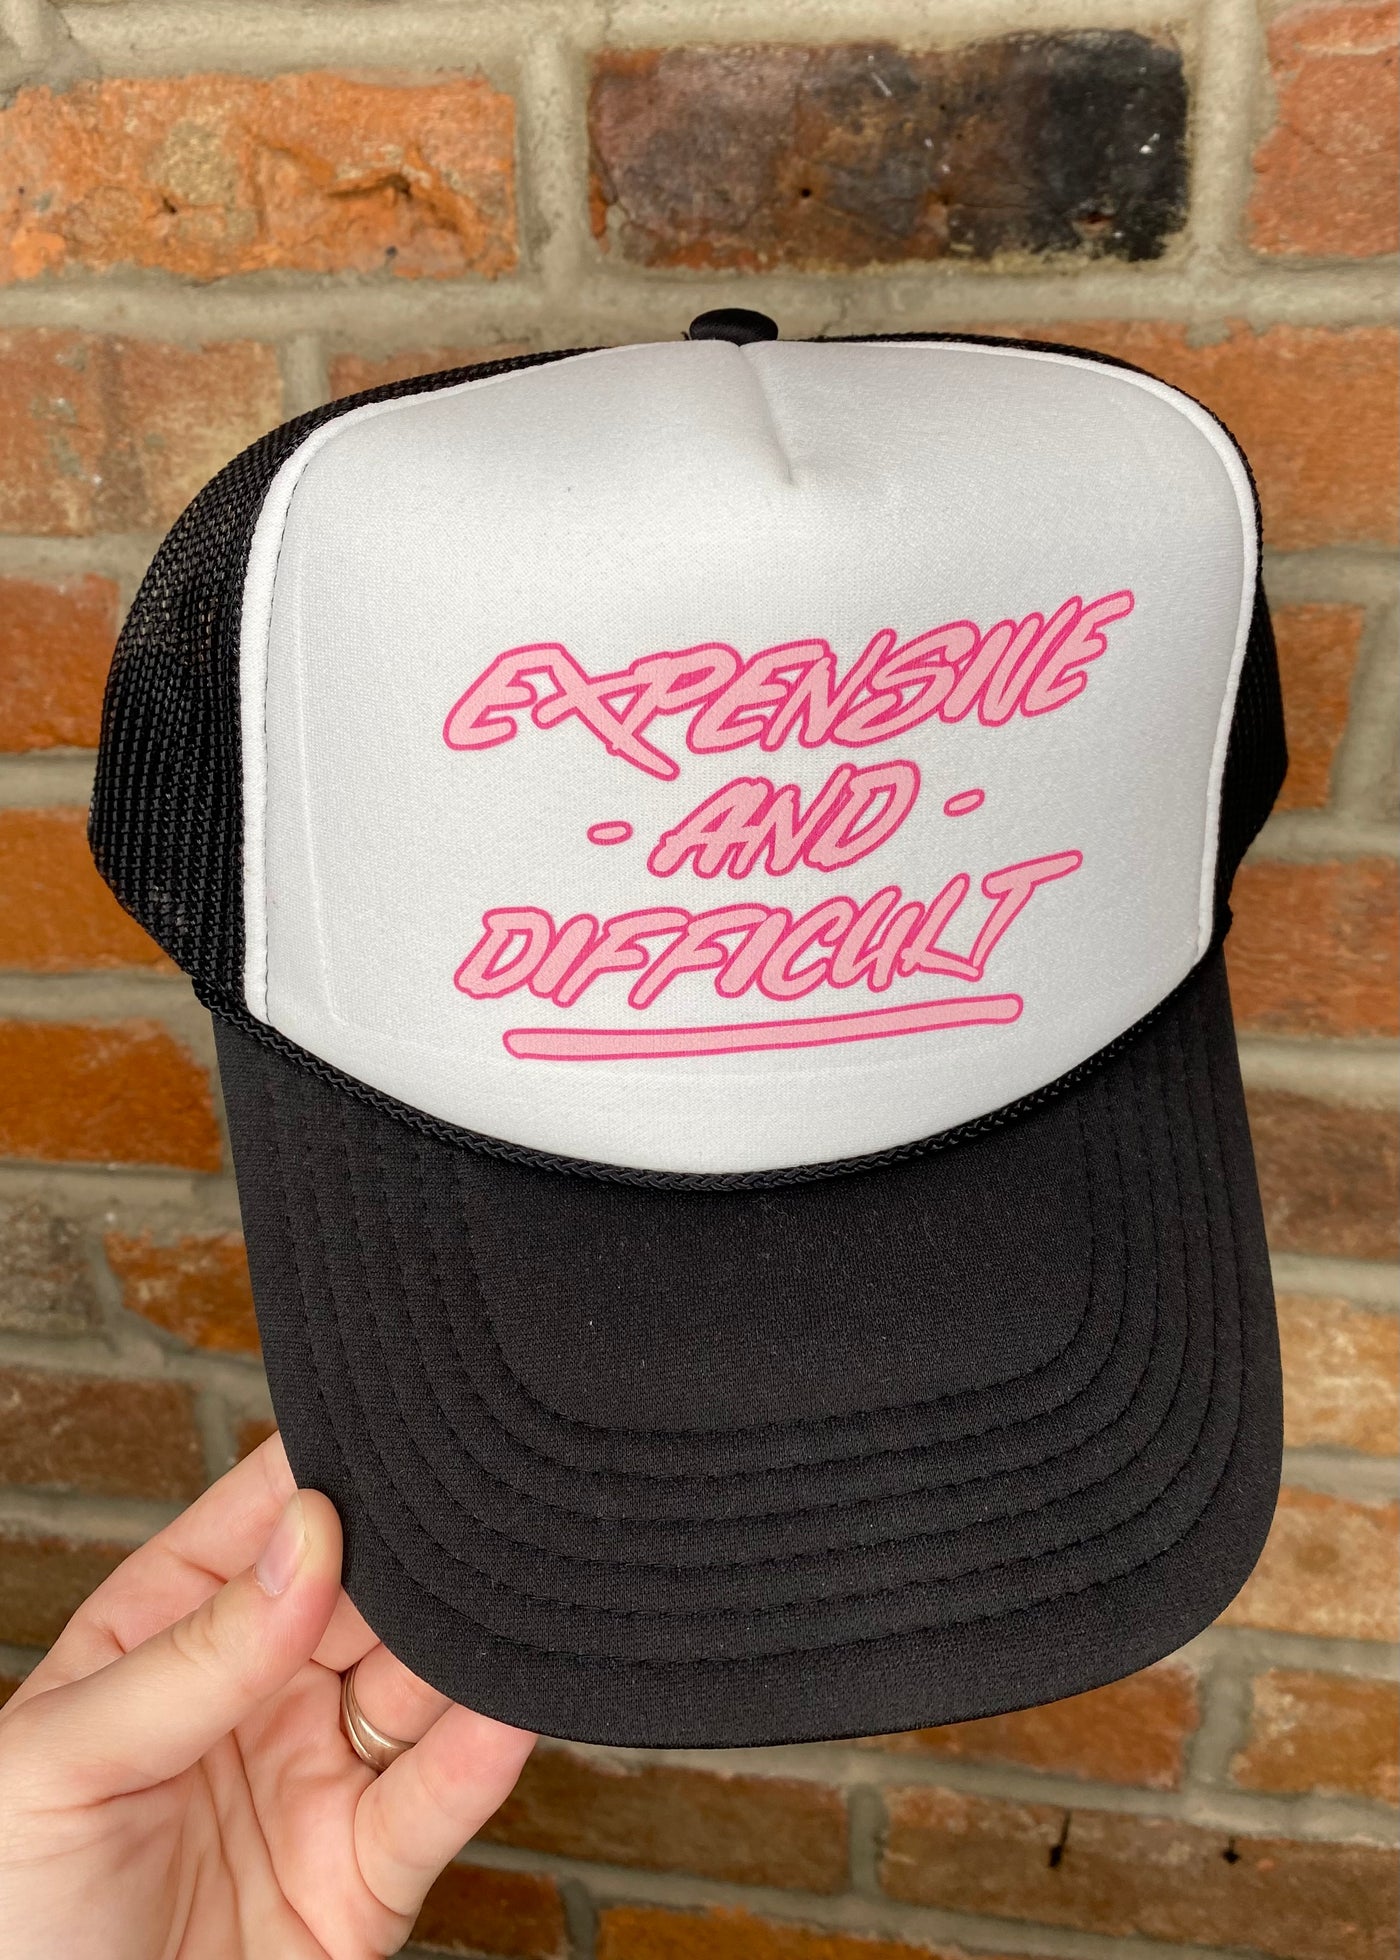 Expensive and Difficult Trucker Hat